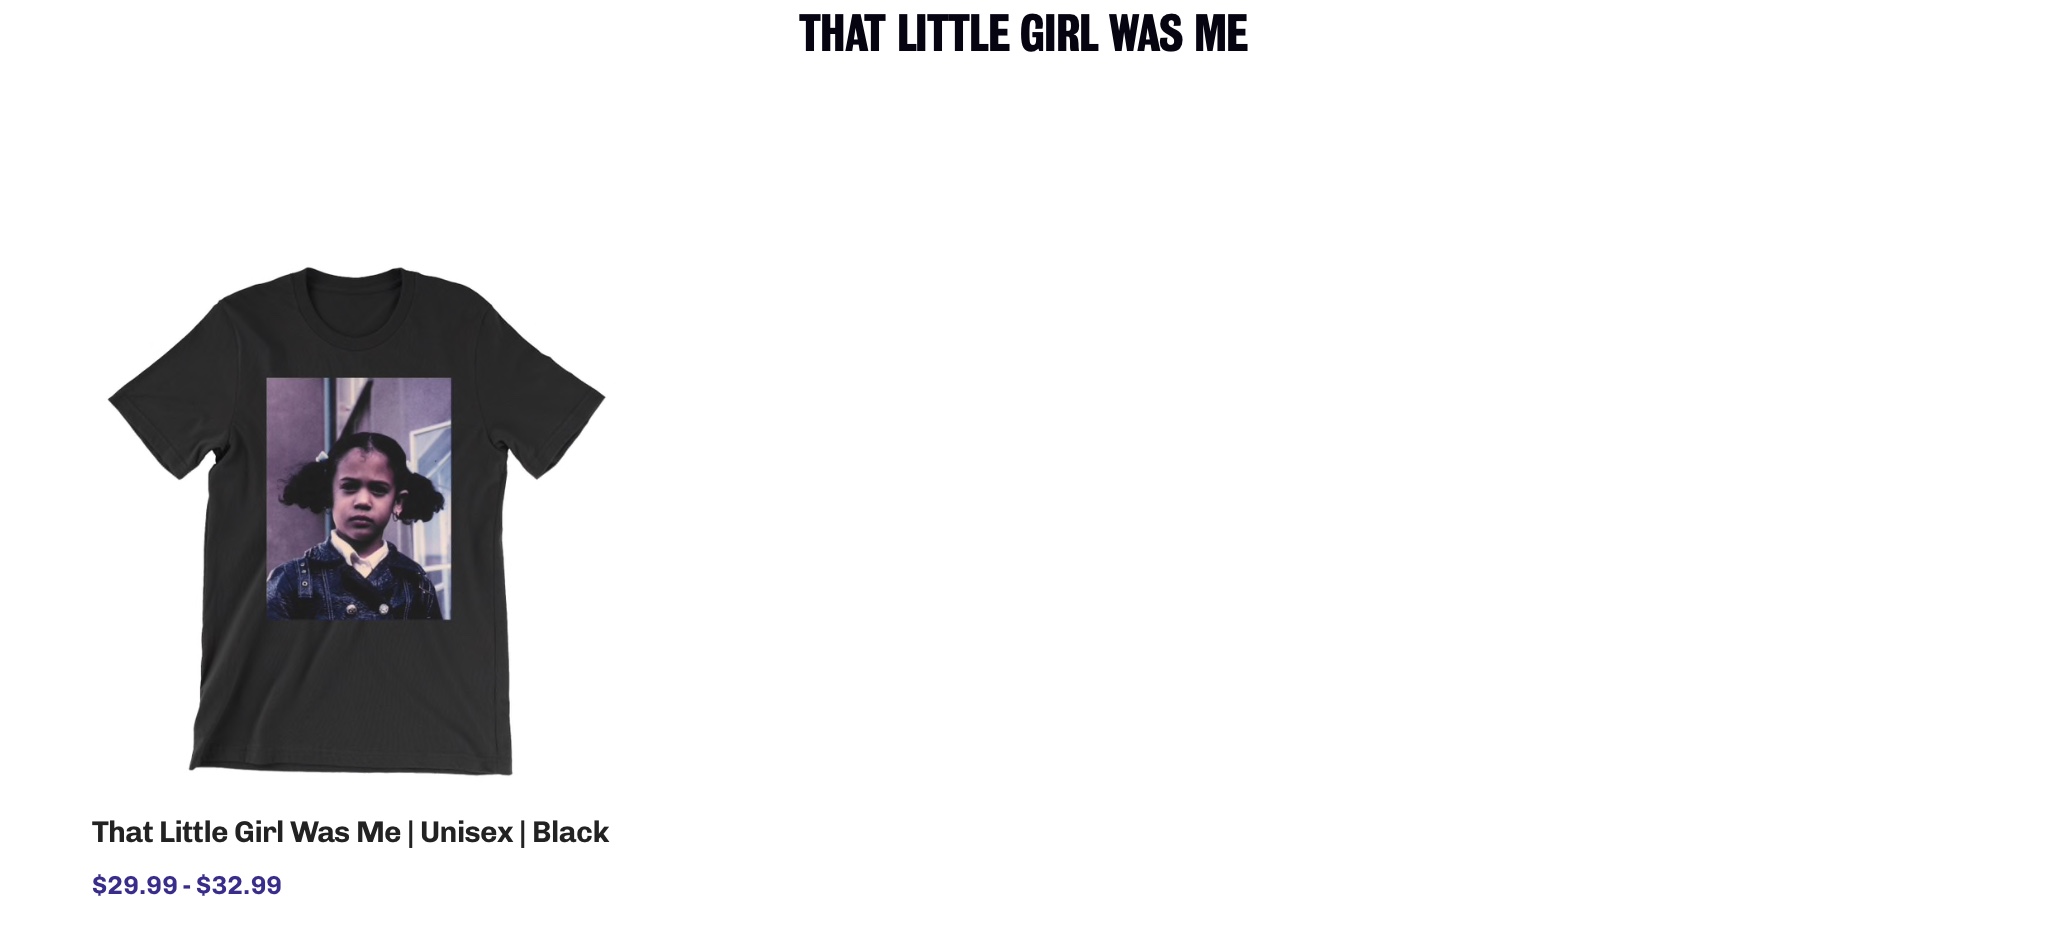 “That Little Girl Was Me” t-shirt offered by the Kamala Harris campaign as a fundraising item. Kamal Harris campaign screenshot.